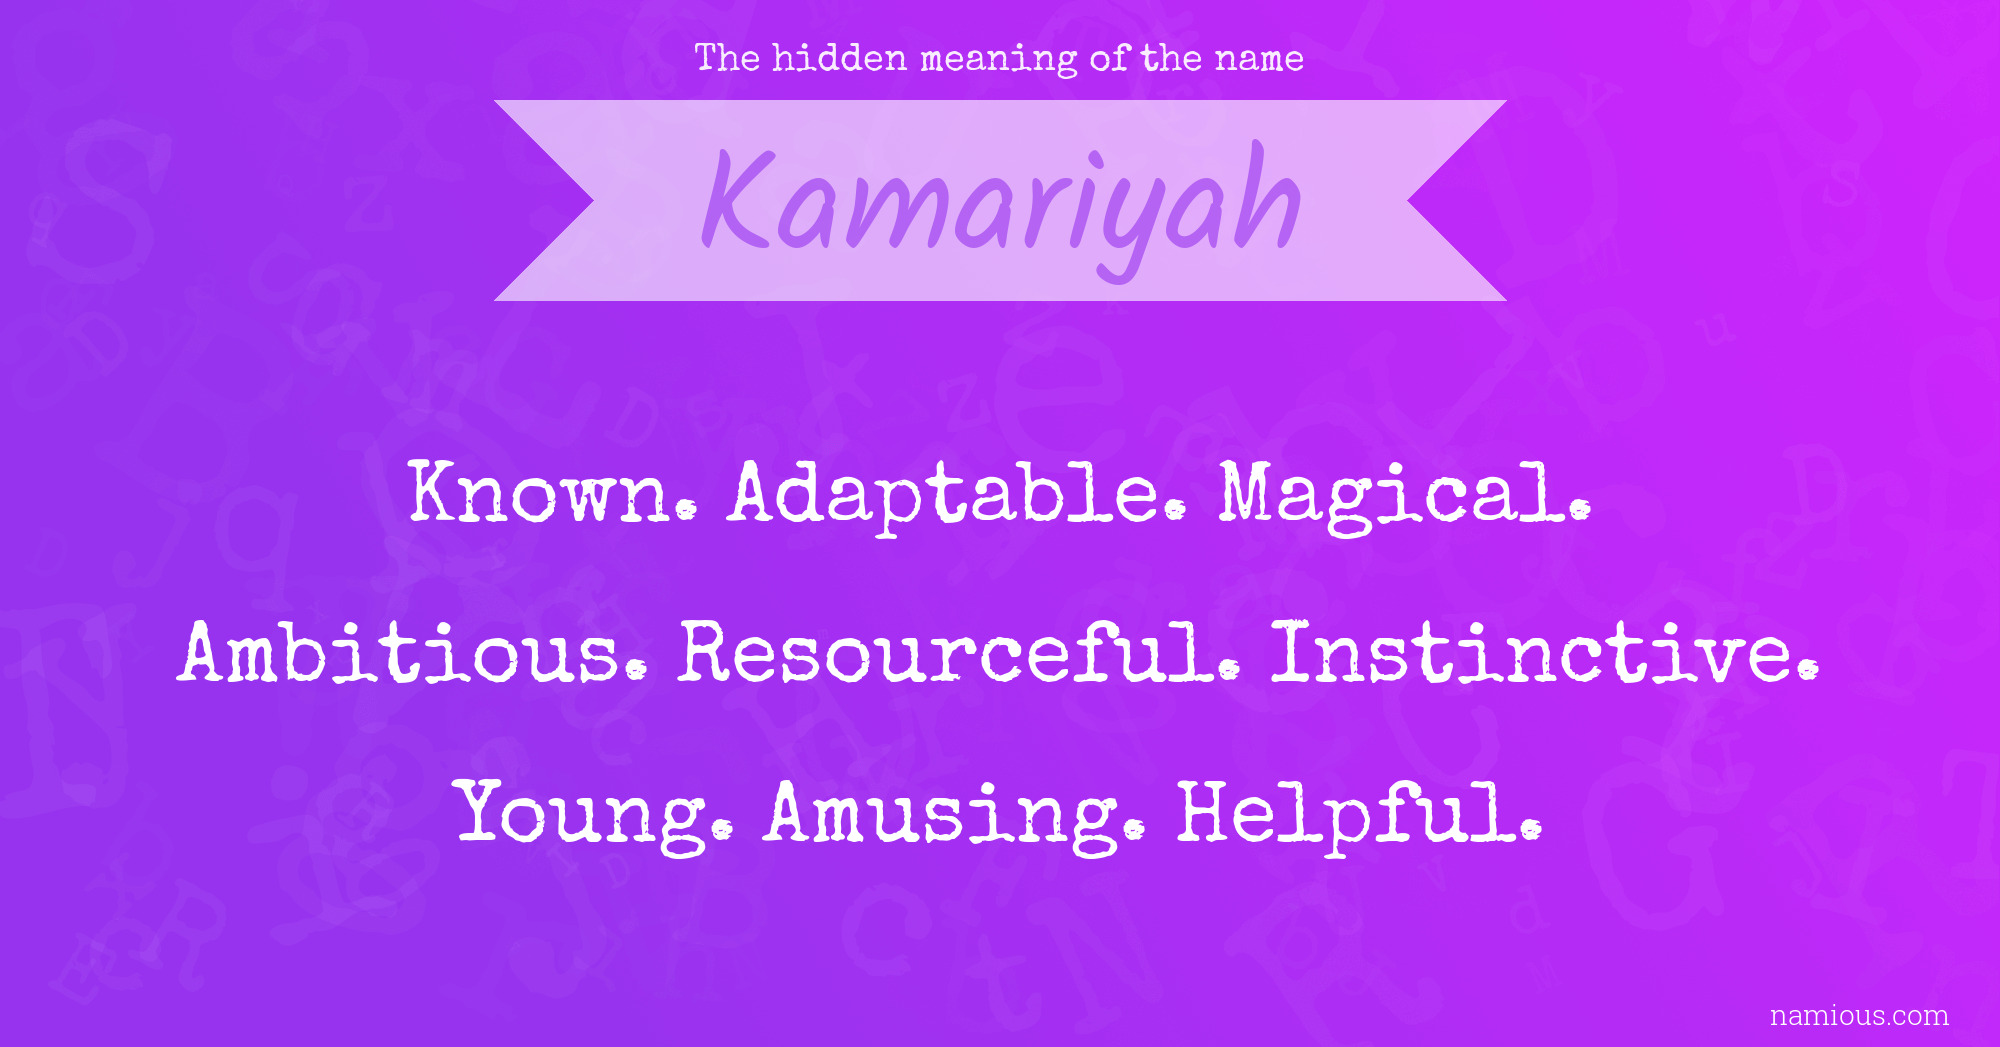 The hidden meaning of the name Kamariyah